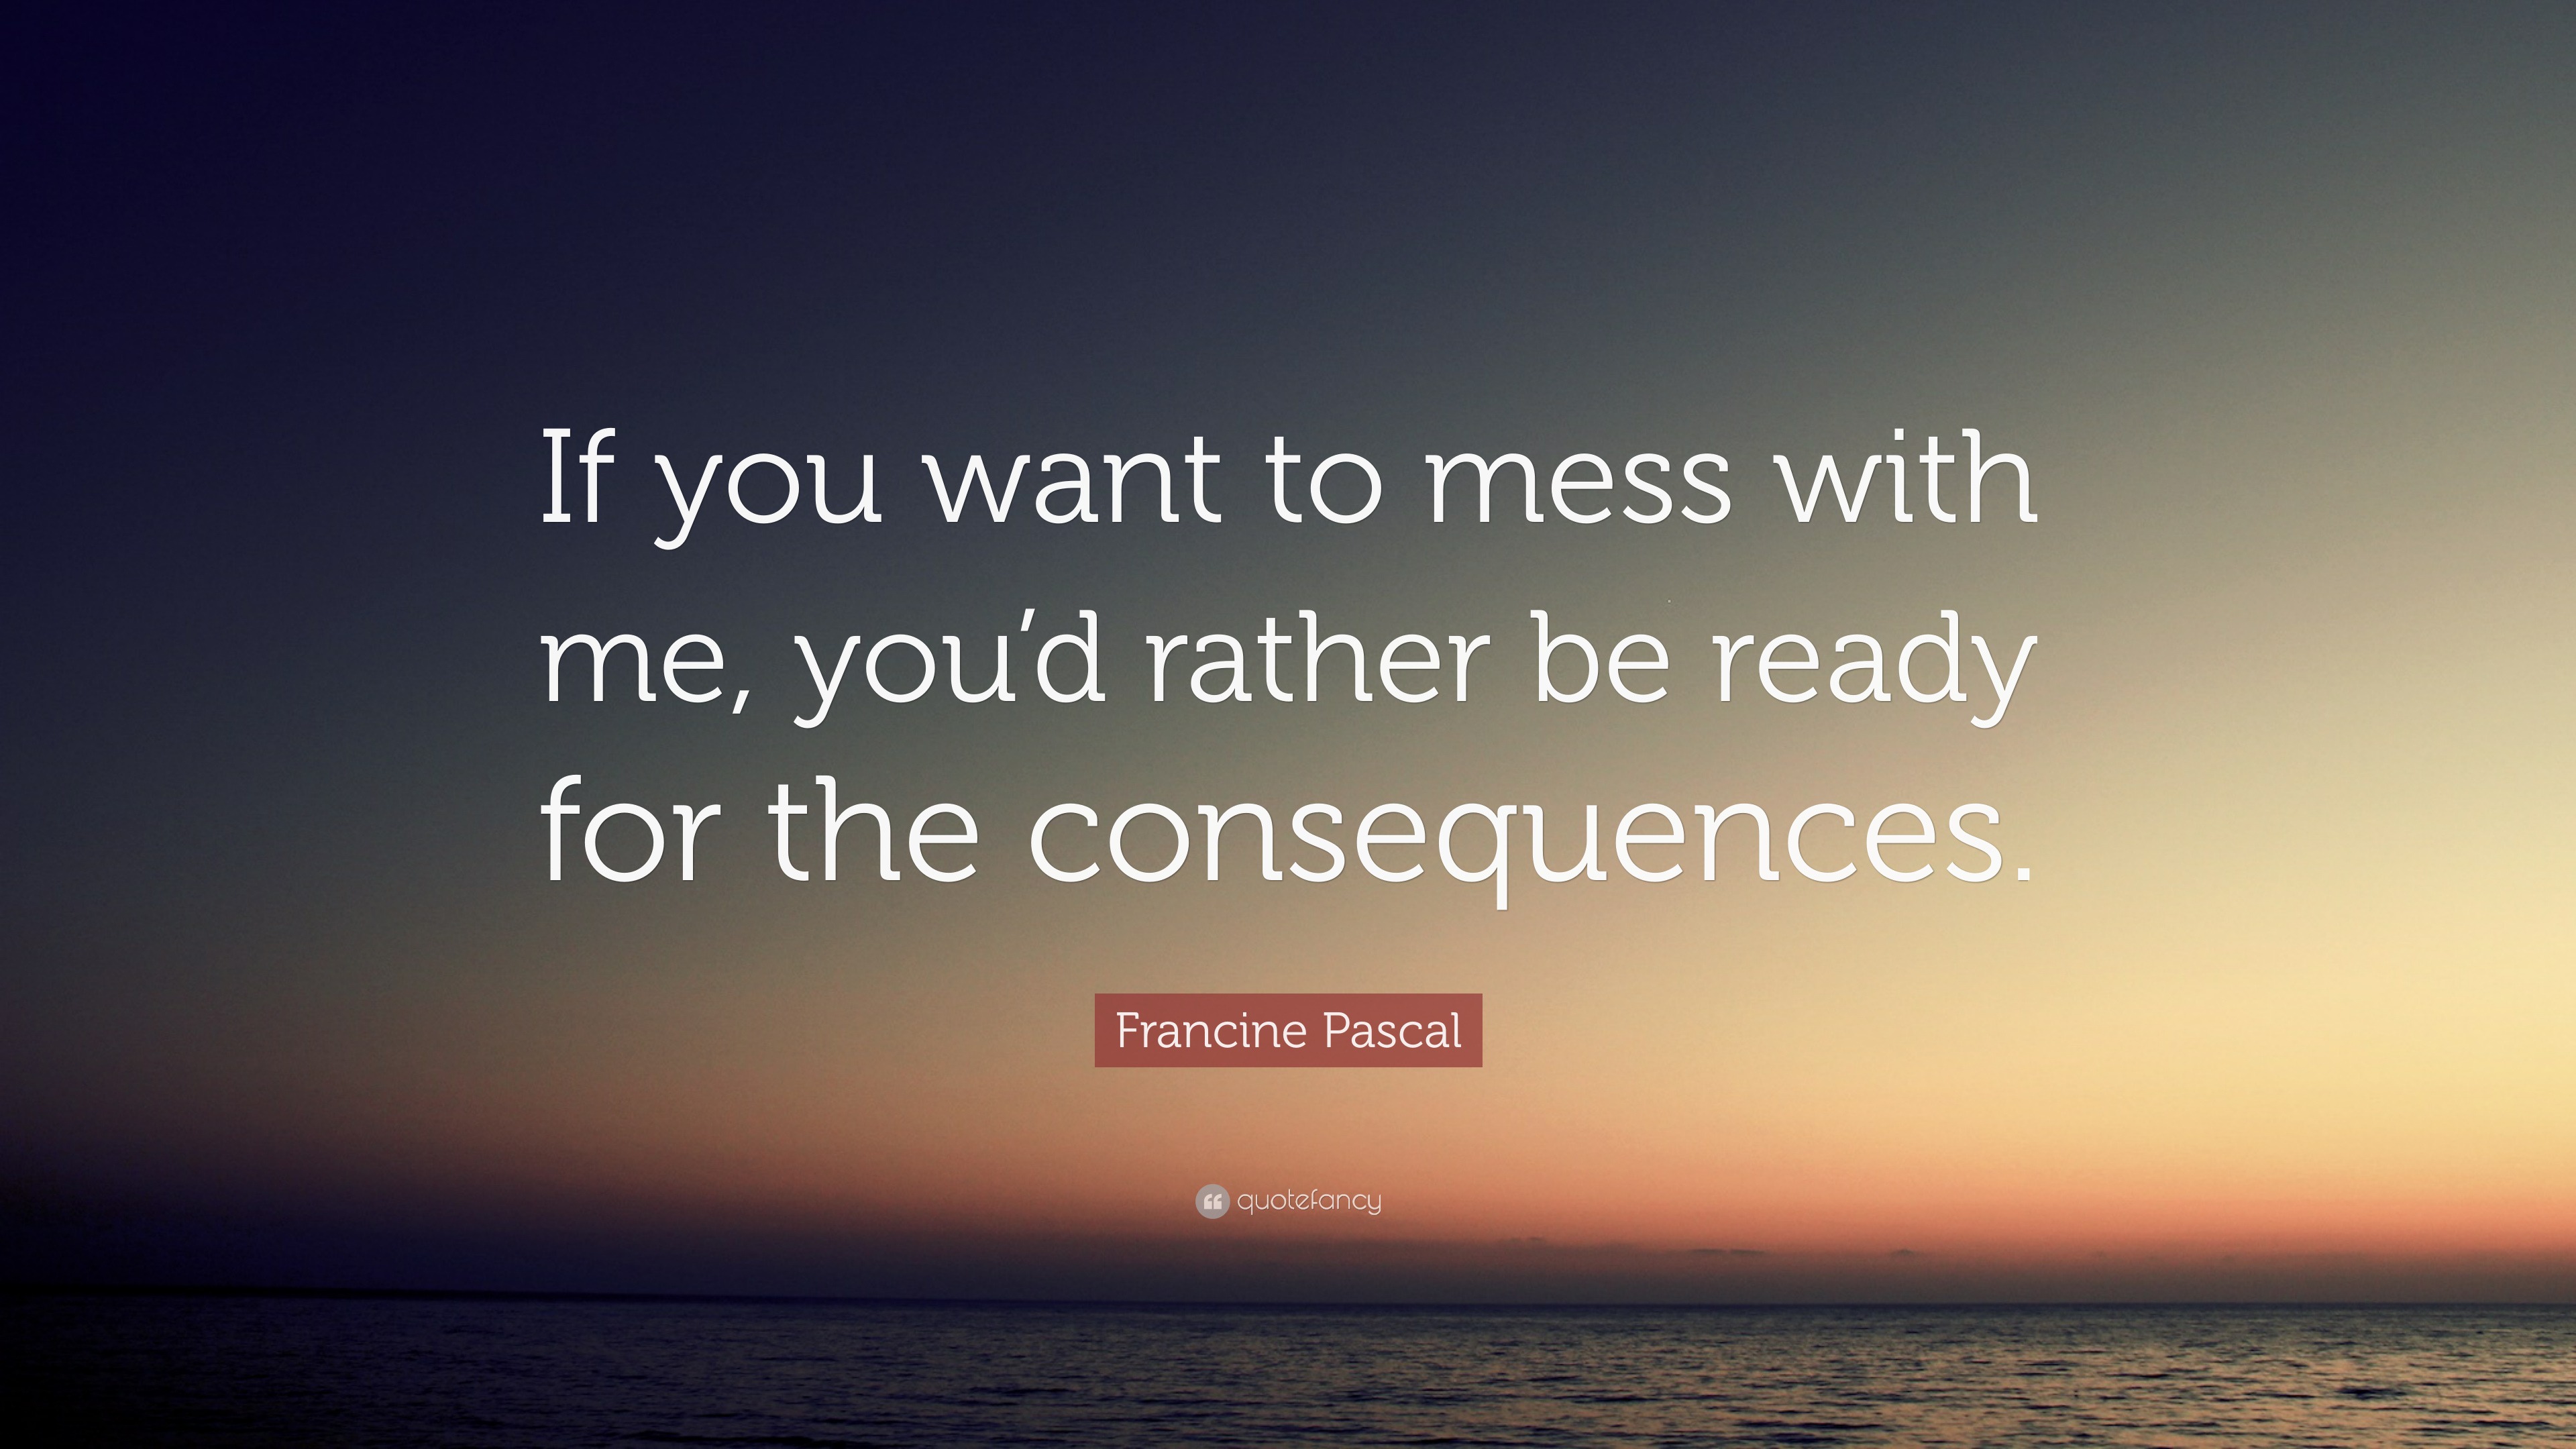 Francine Pascal Quote If You Want To Mess With Me You D Rather Be Ready For